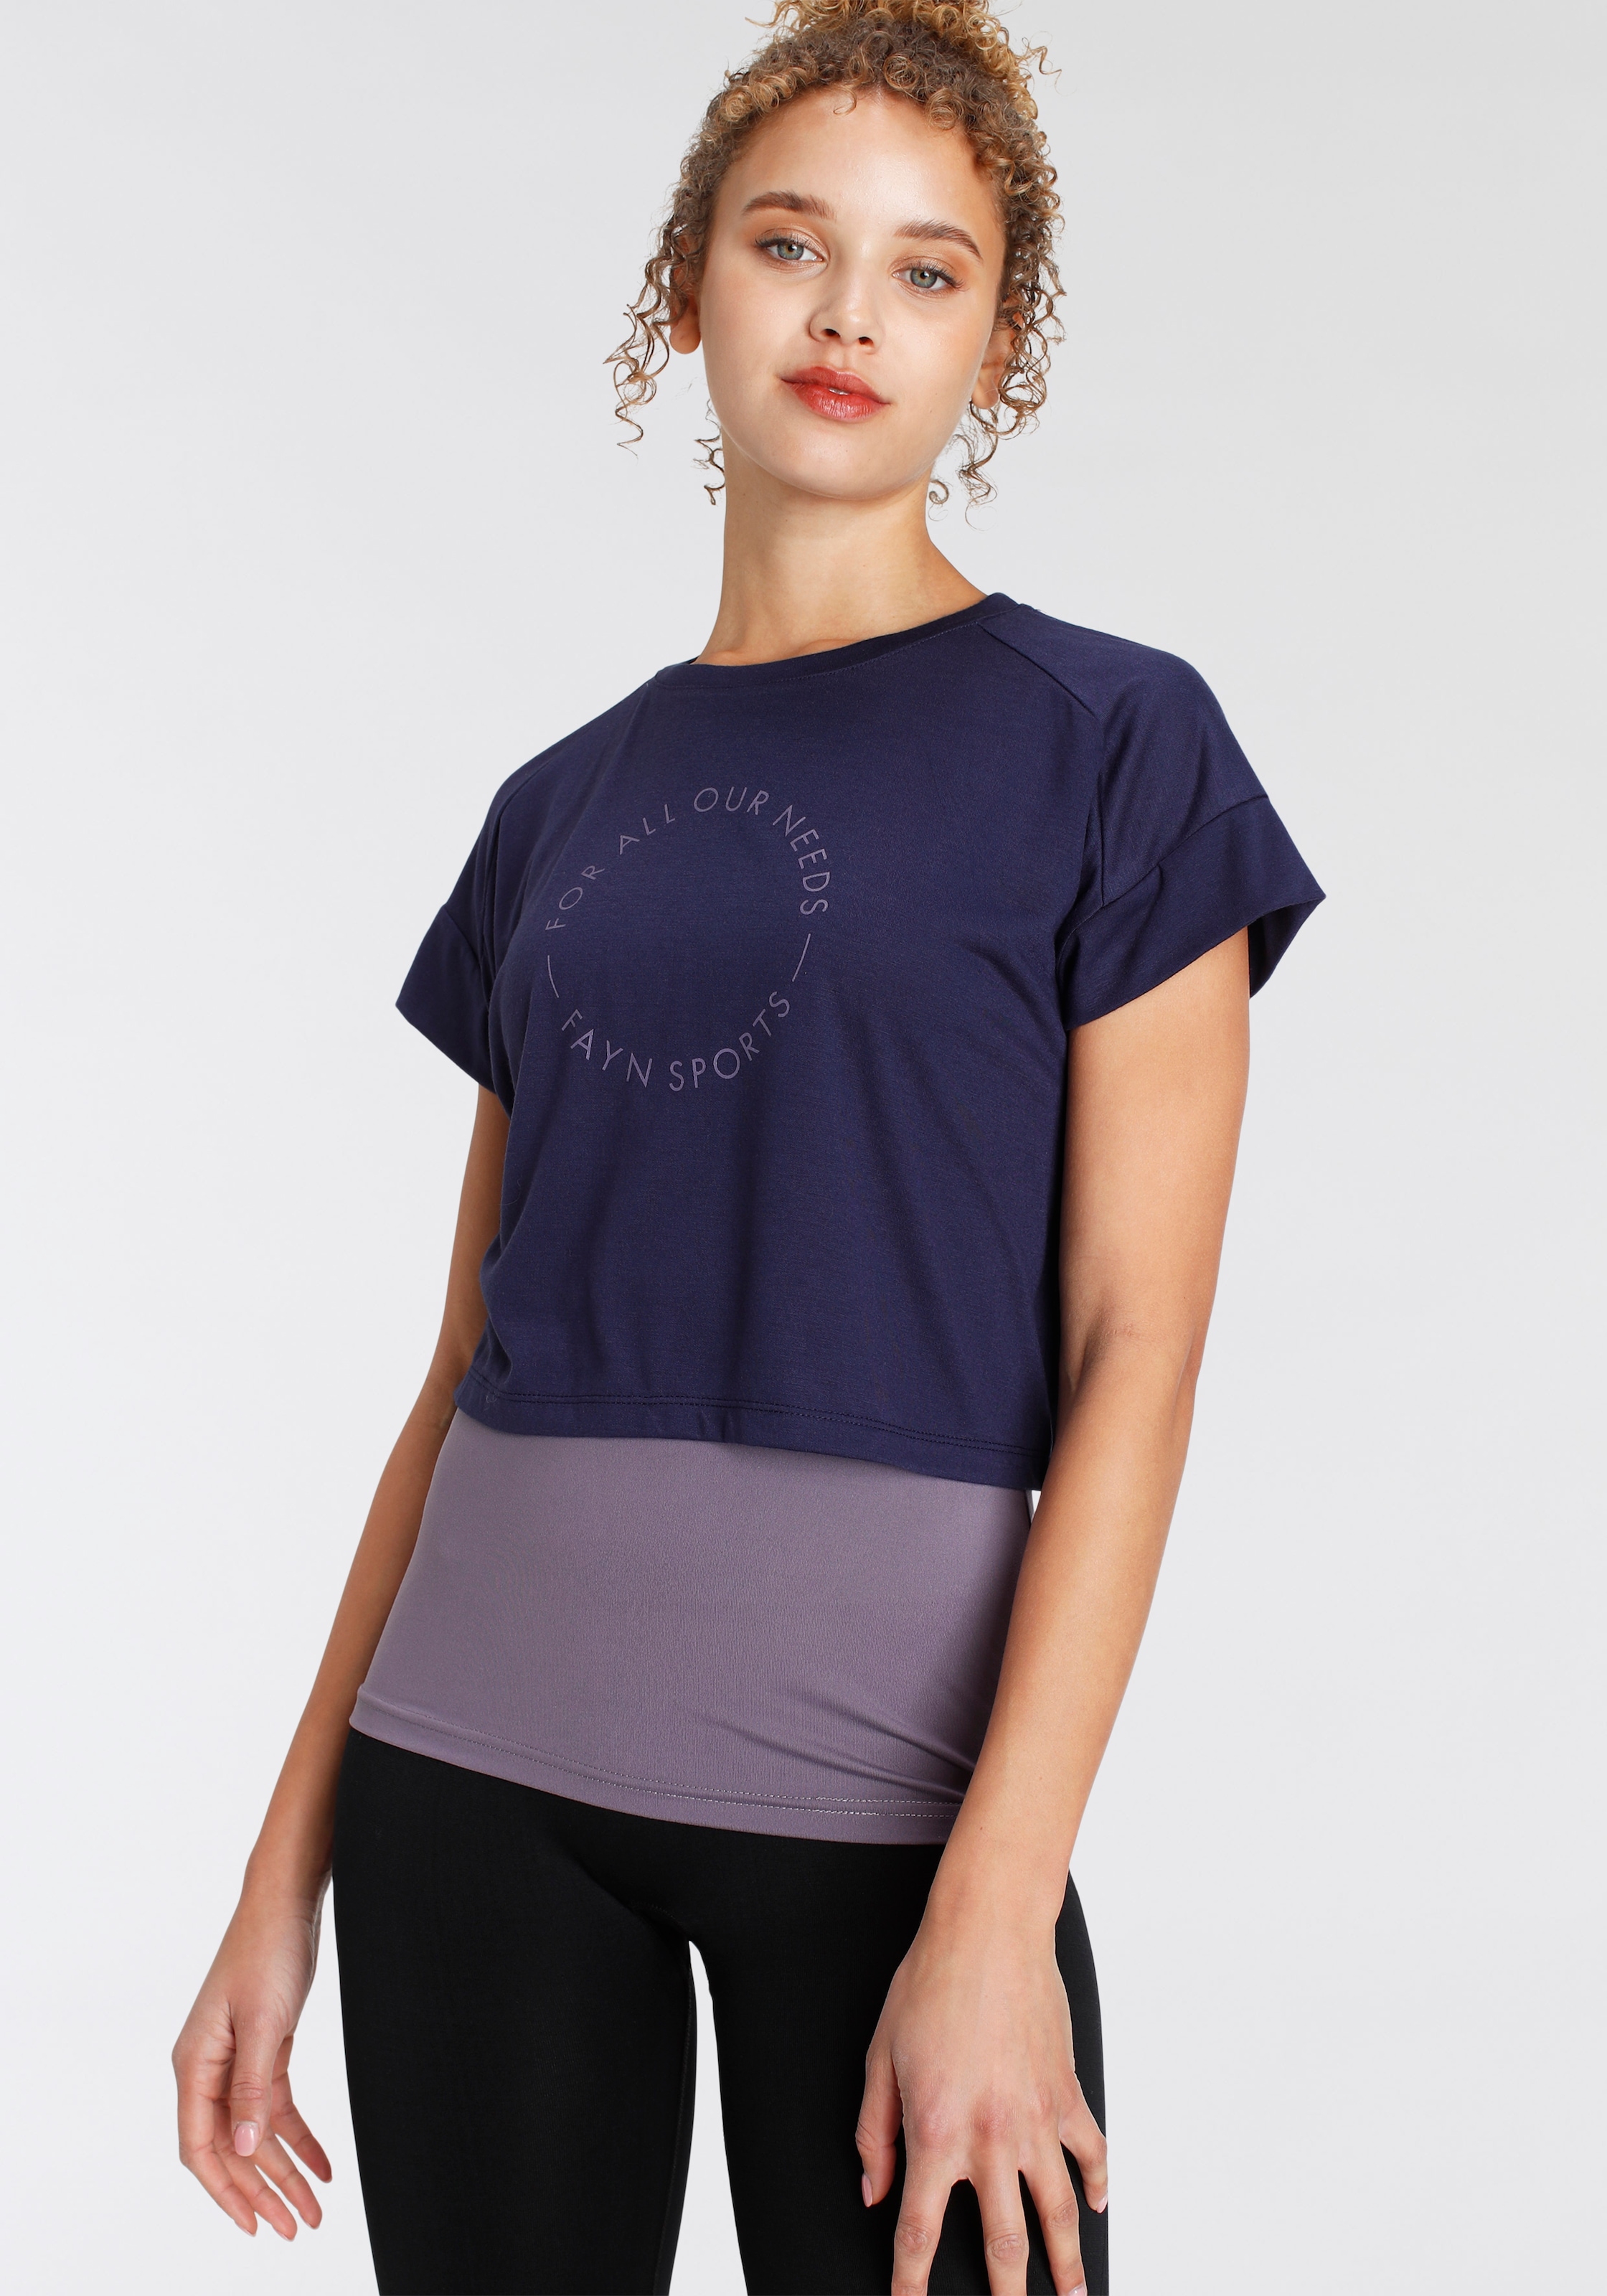 bei FAYN »Cropped SPORTS 2 Top«, tlg.) ♕ T-Shirt (Set,